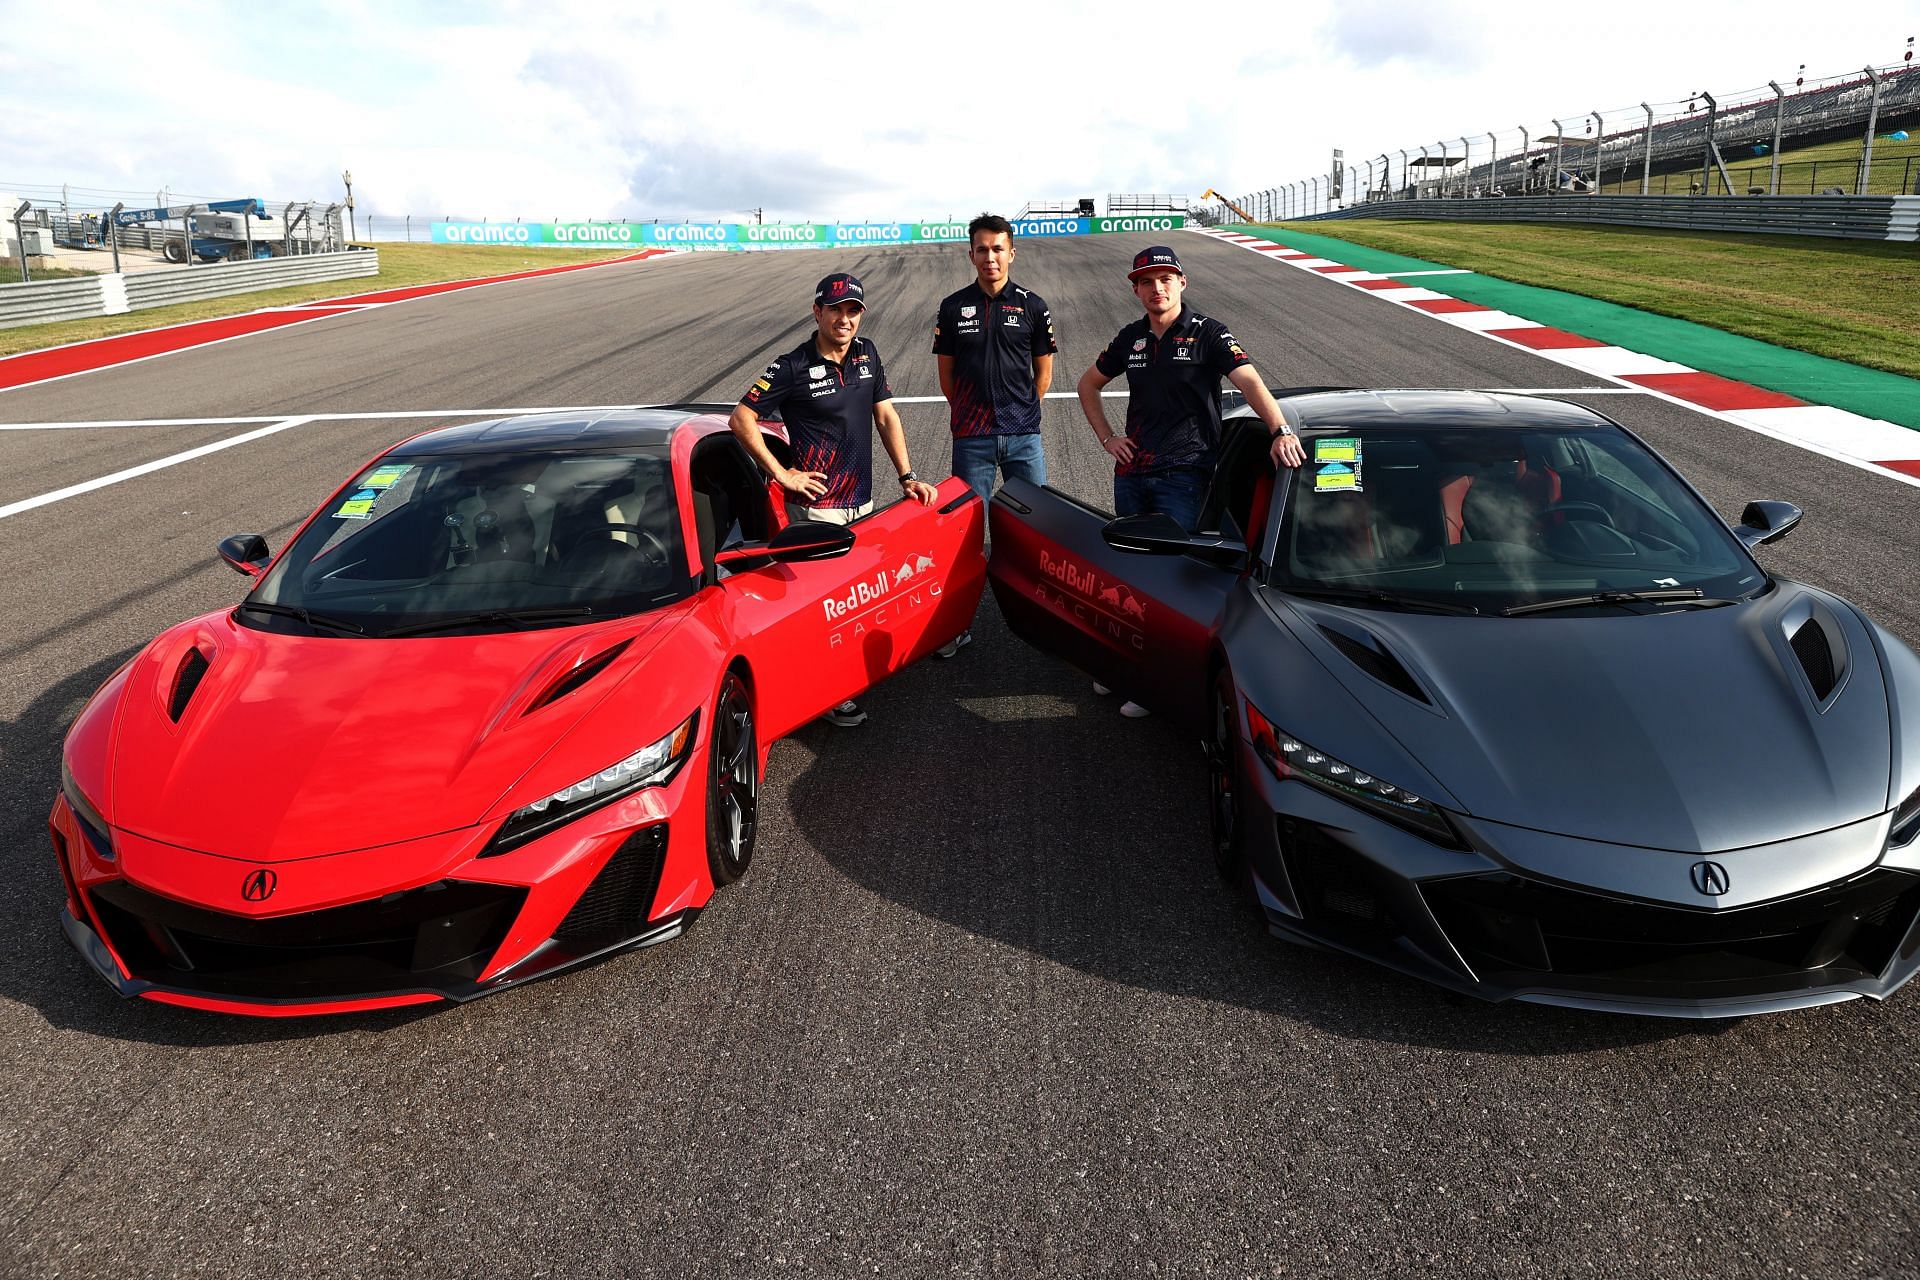 F1 Grand Prix of USA - Max Verstappen and teammates pose in front of Honda supercars